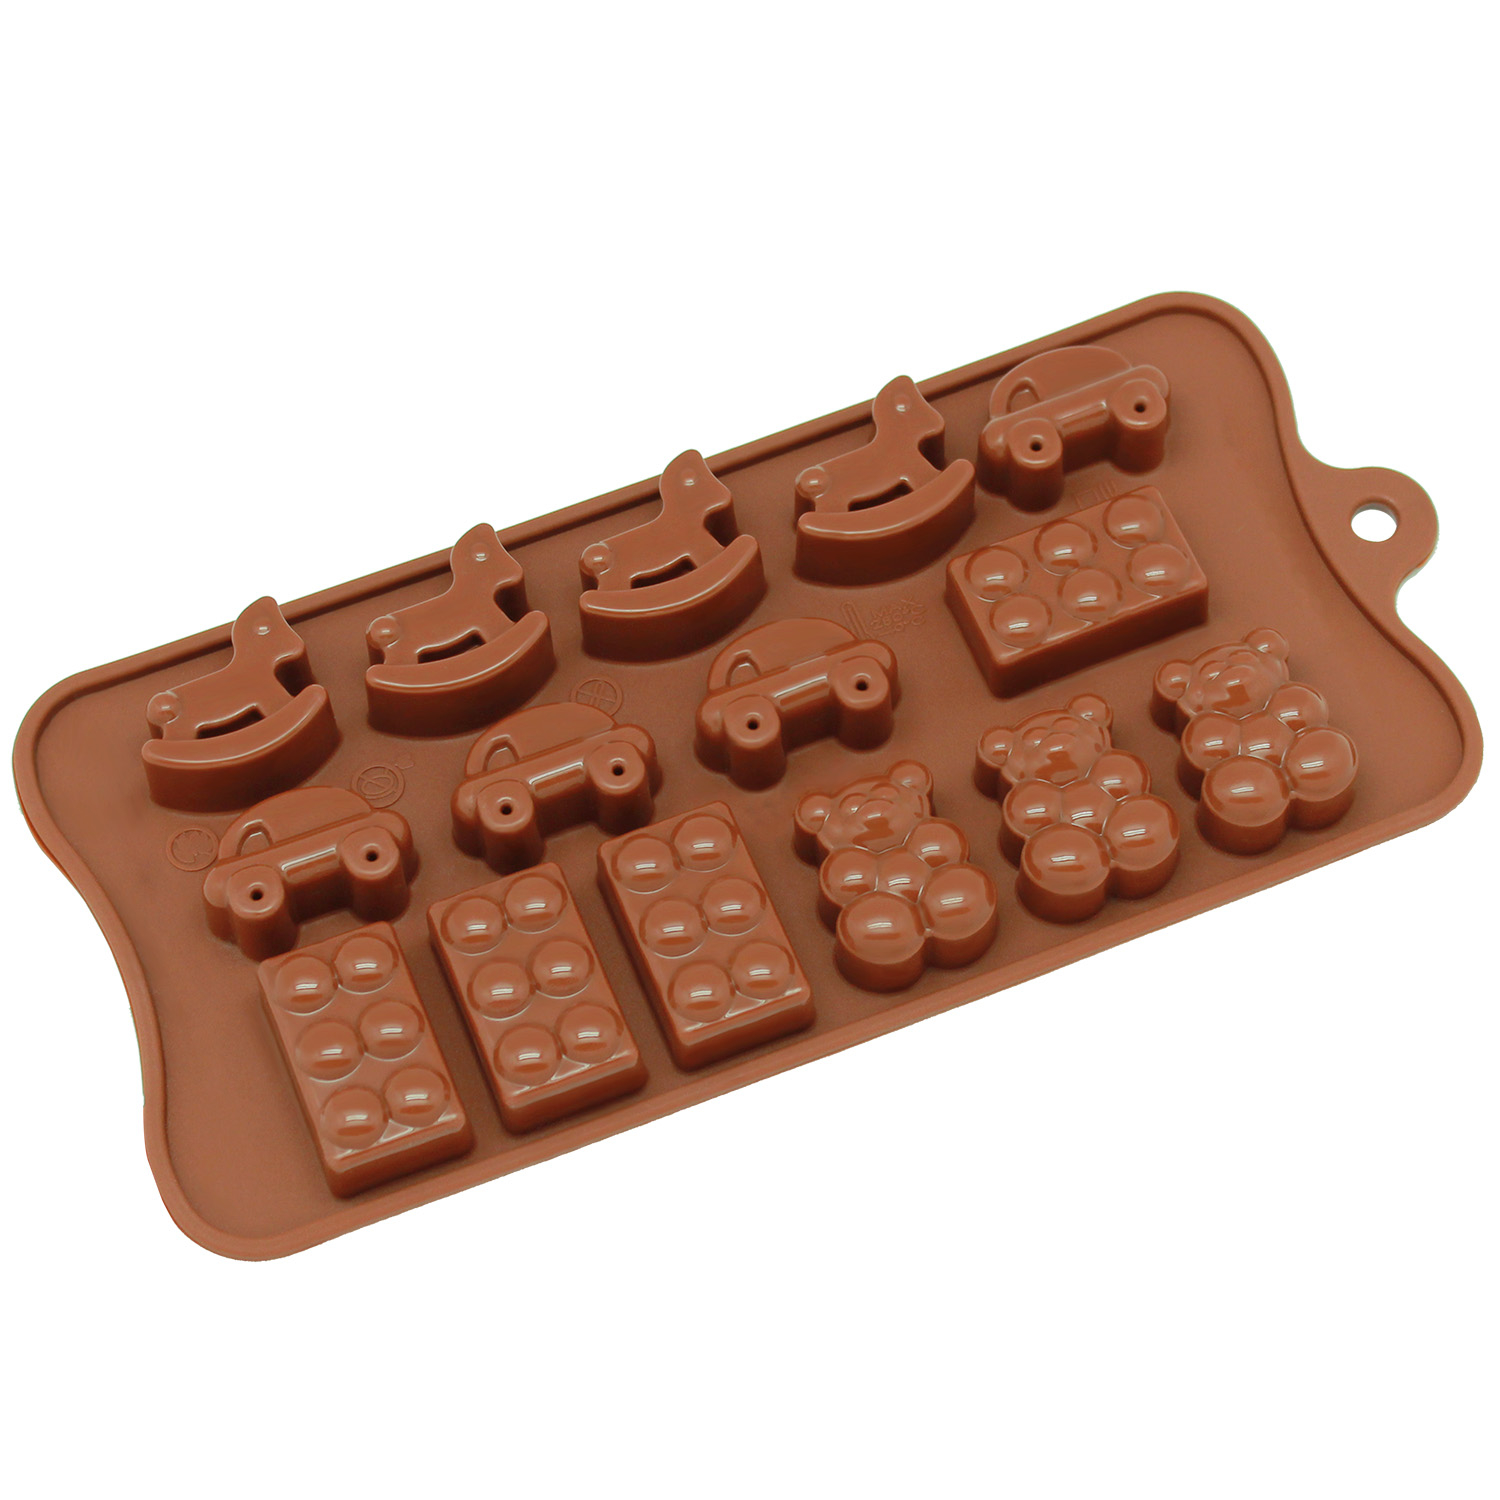 Freshware Silicone Mold, Chocolate Mold, Candy Mold, Ice Mold, Soap Mold for Chocolate, Candy and Gummy, Toy, 15-Cavity